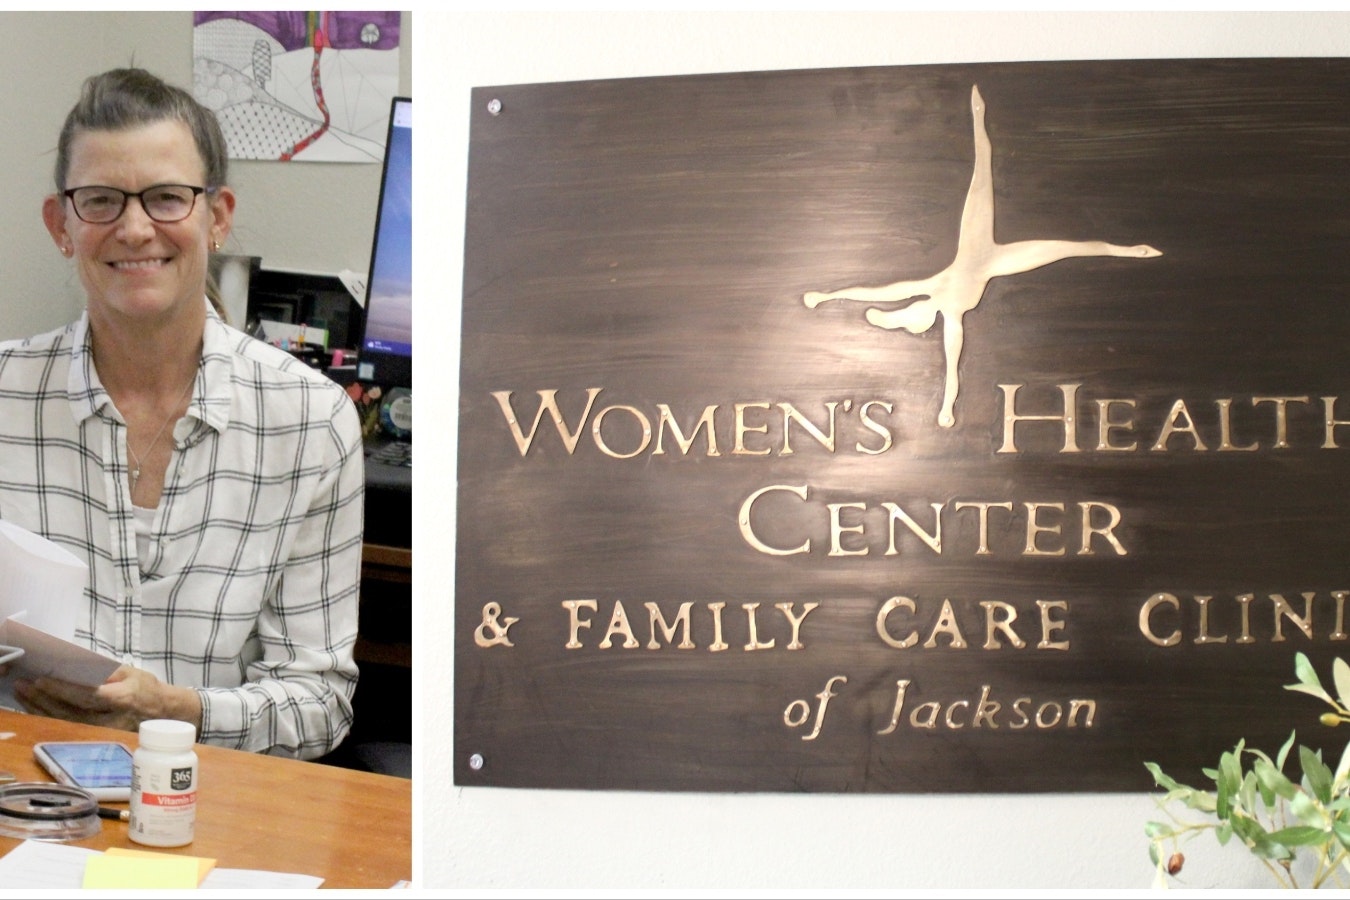 Dr. Giovannina Anthony is an OB-GYN at the Women's Health Center and Family Care Clinic in Jackson. Until less than a month ago, the clinic was the only place in Wyoming women could get an abortion.